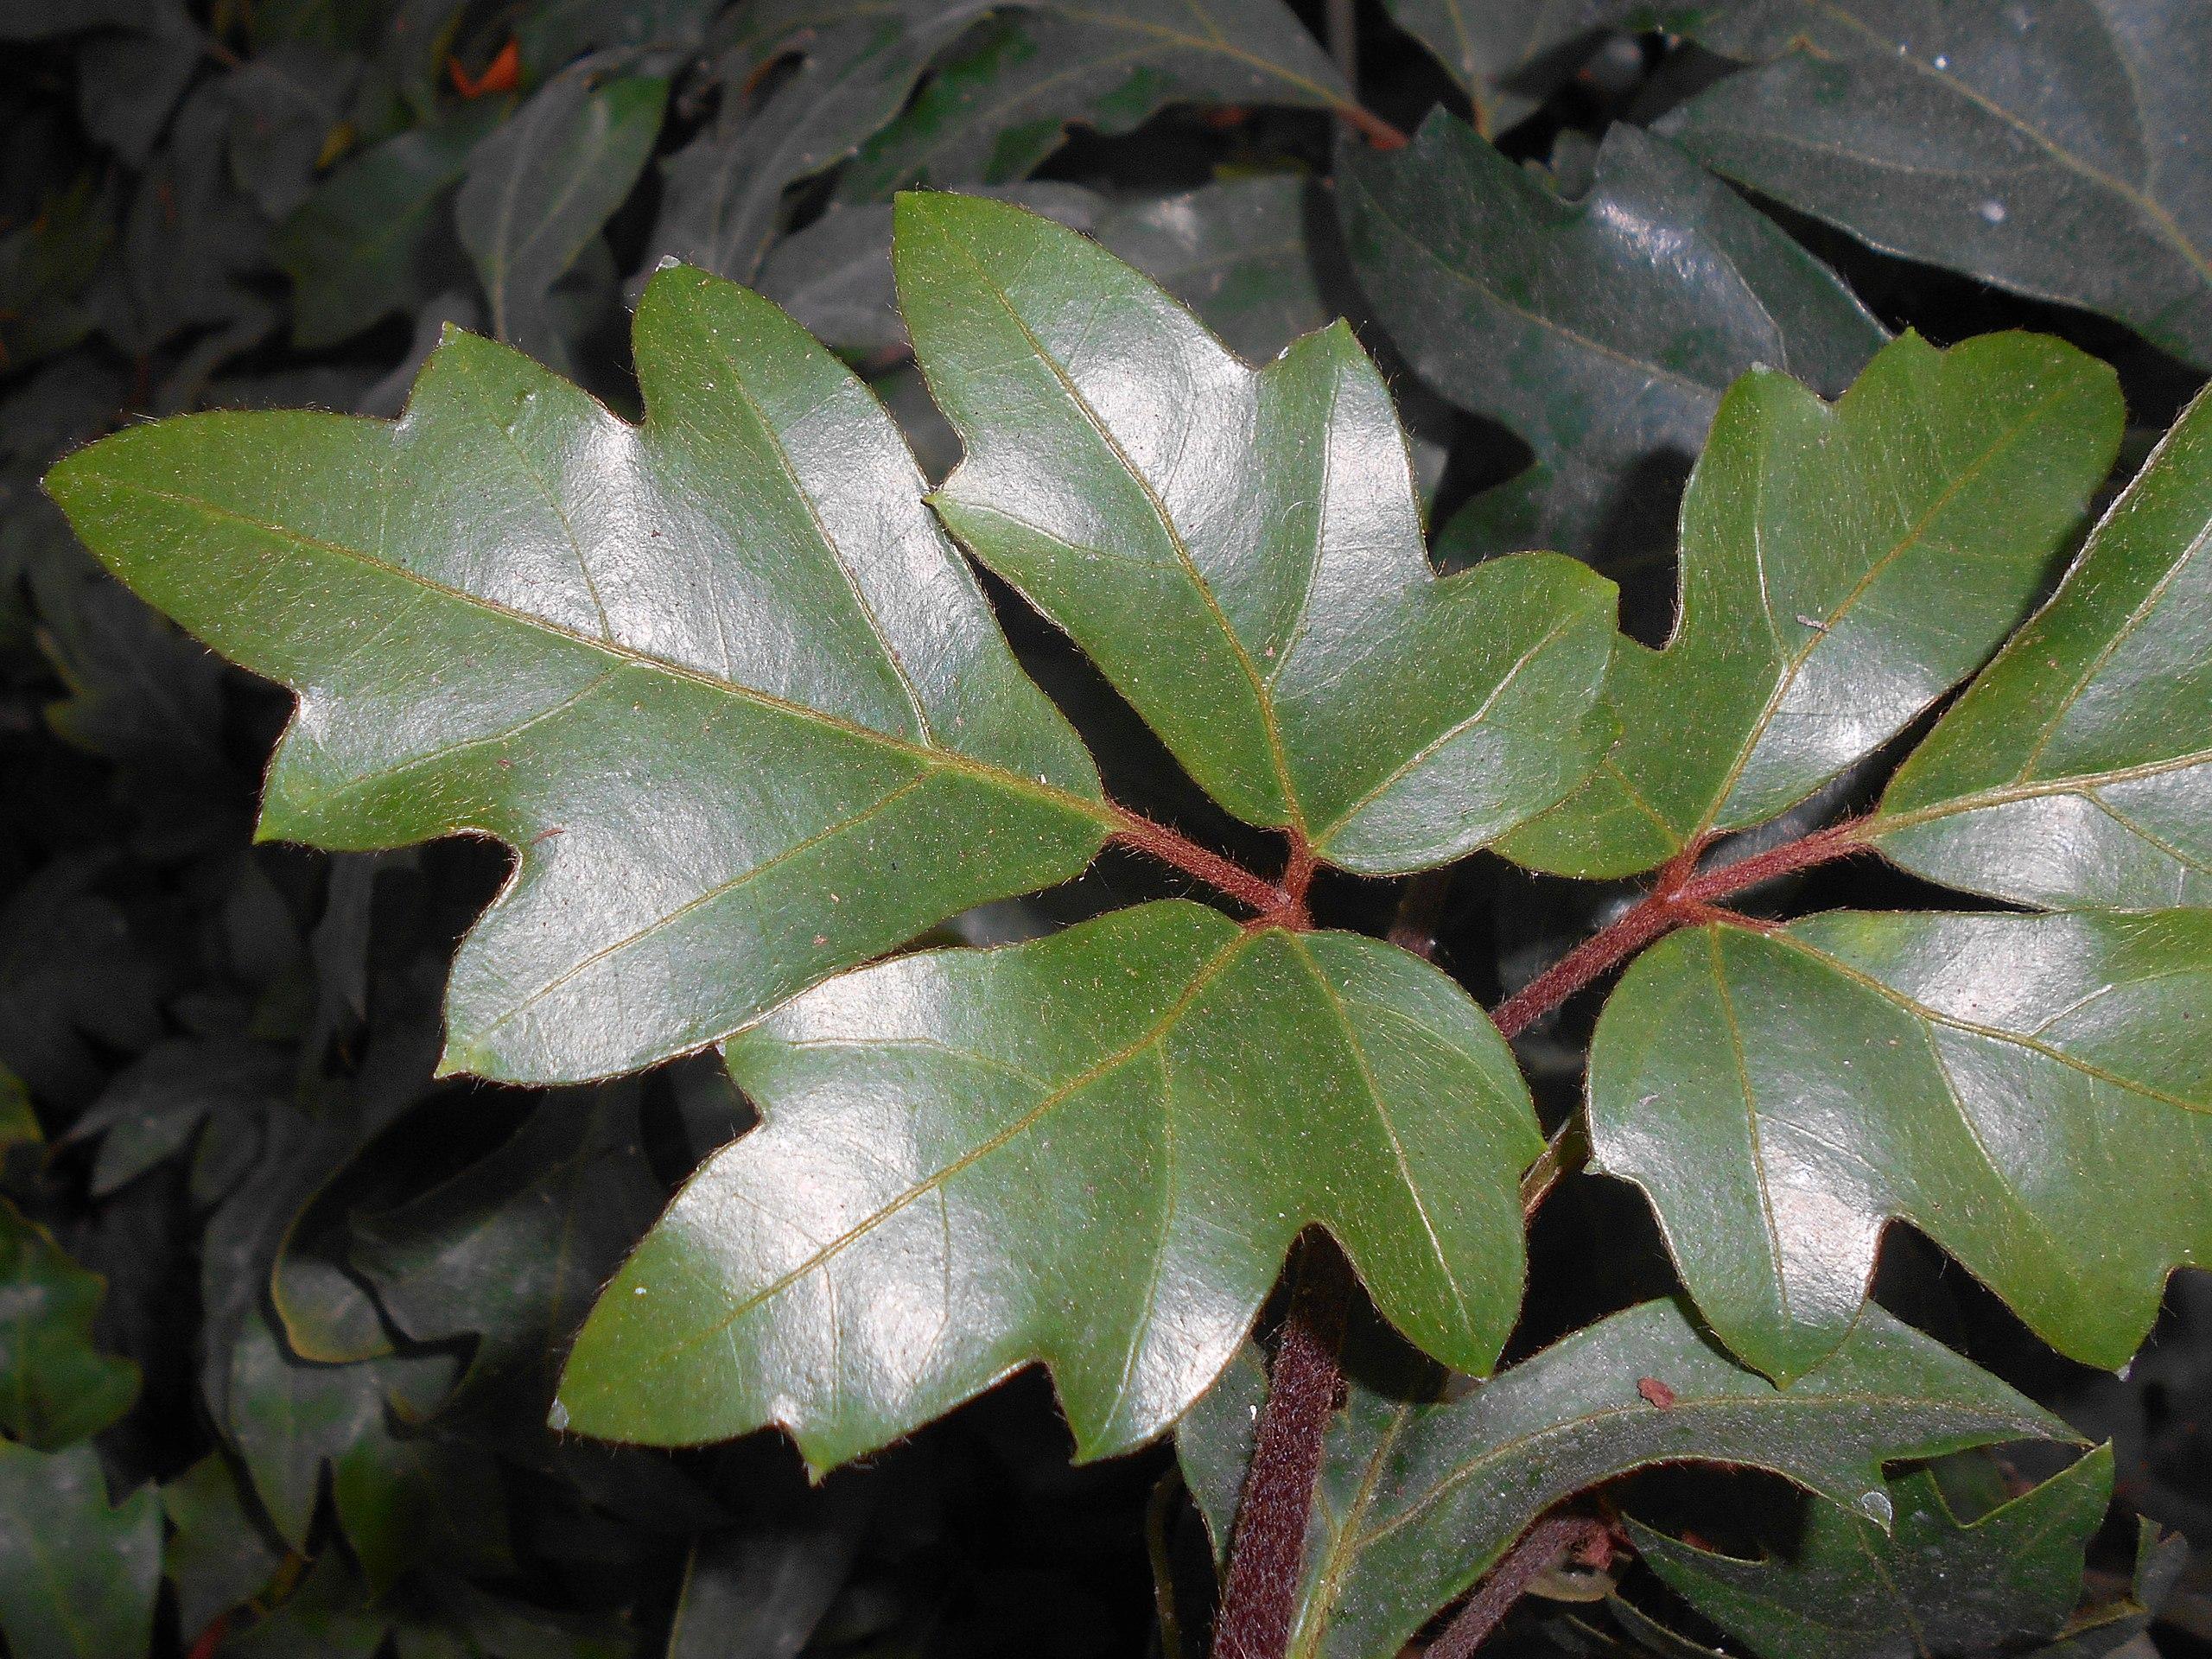 Dark-green leaves, brown-yellow midrib and veins, maroon petiole and stems.